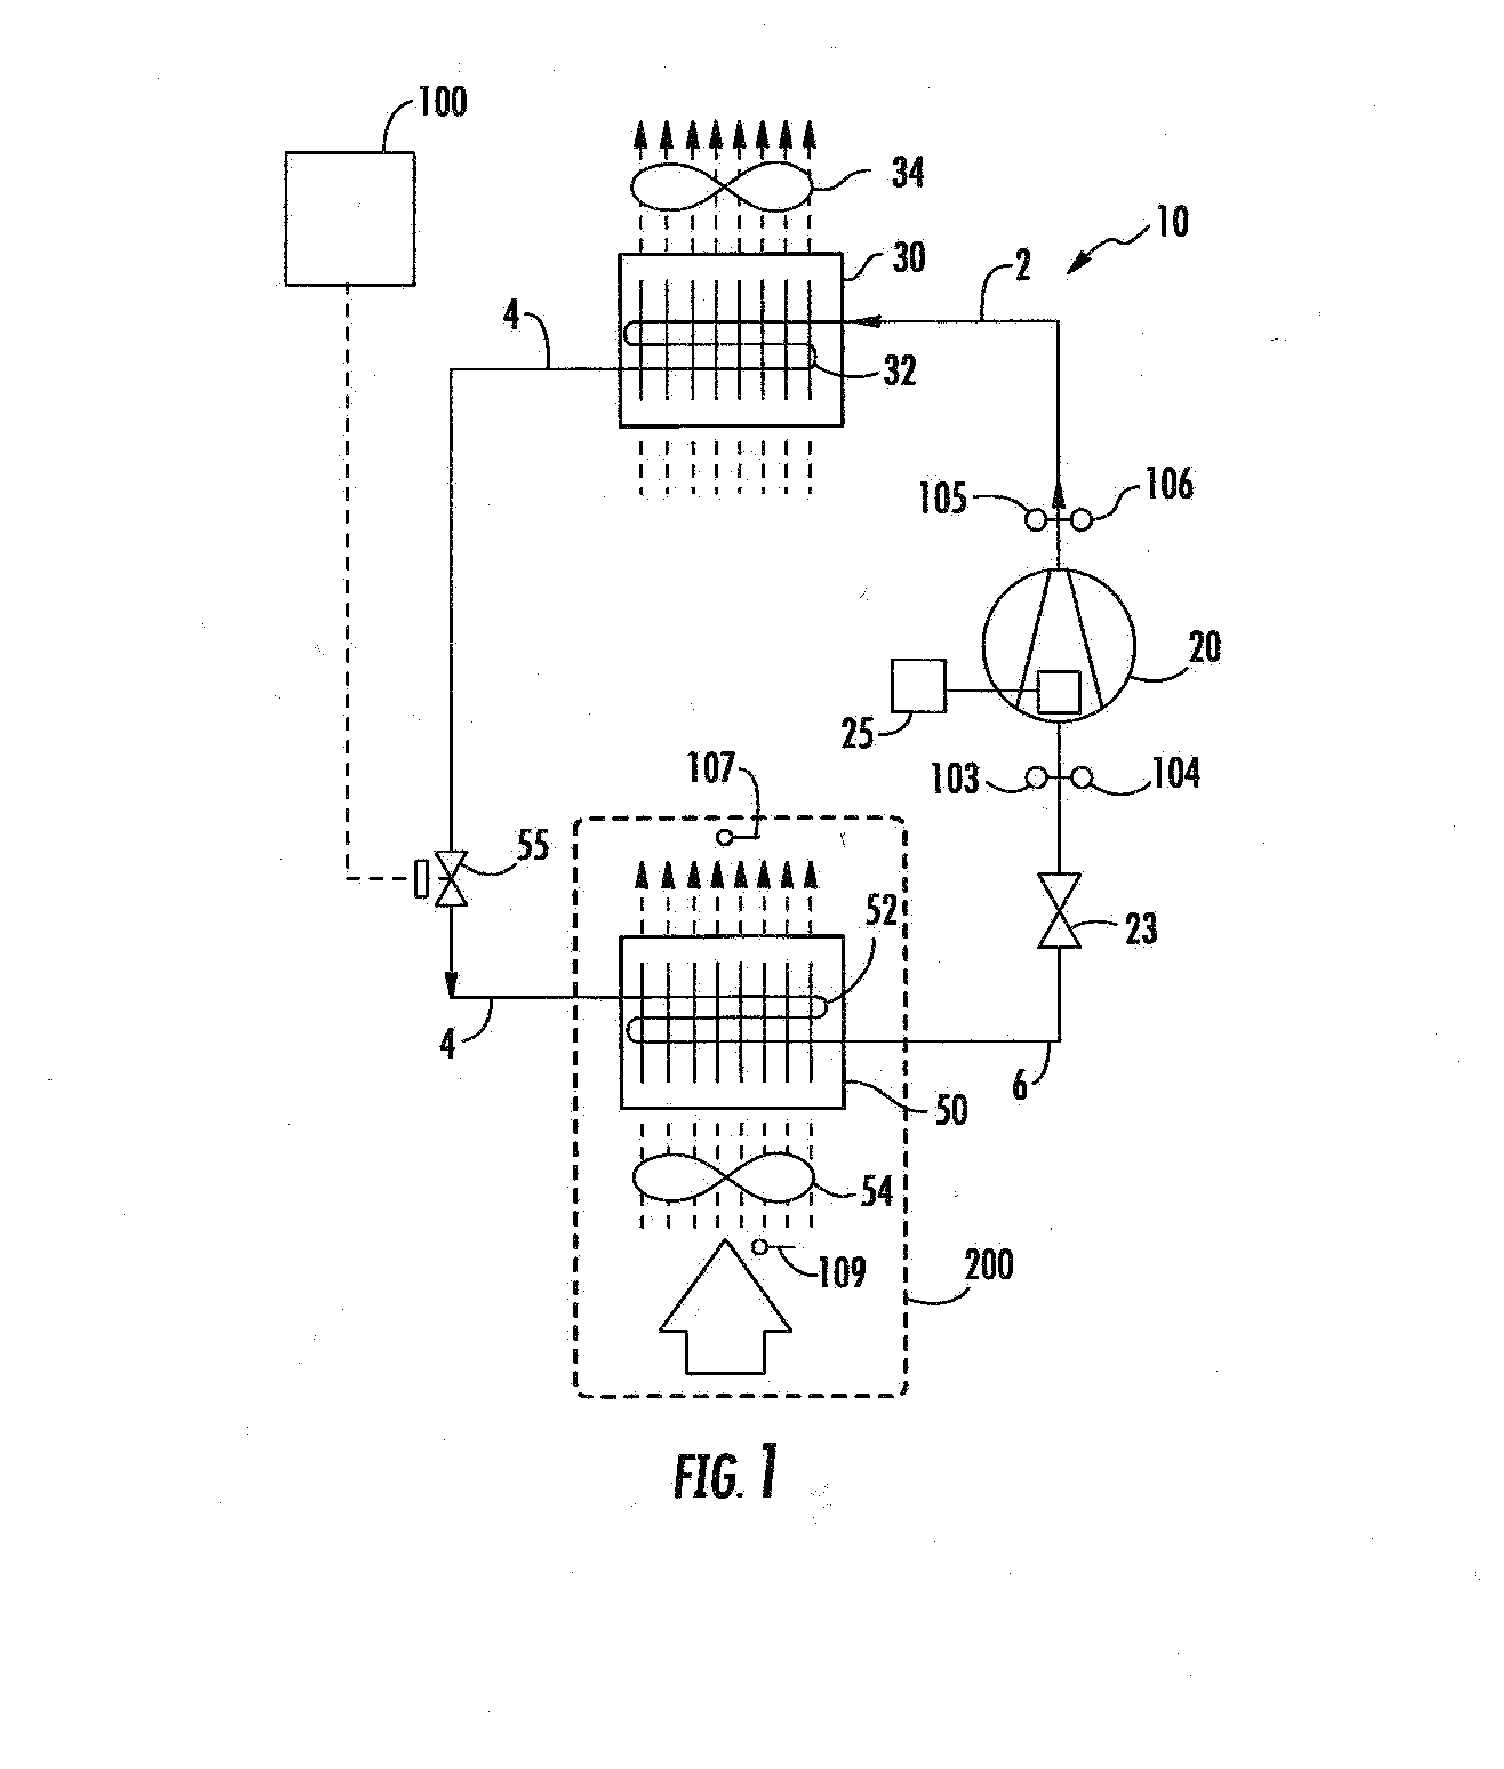 Method For Detection Of Loss Of Refrigerant